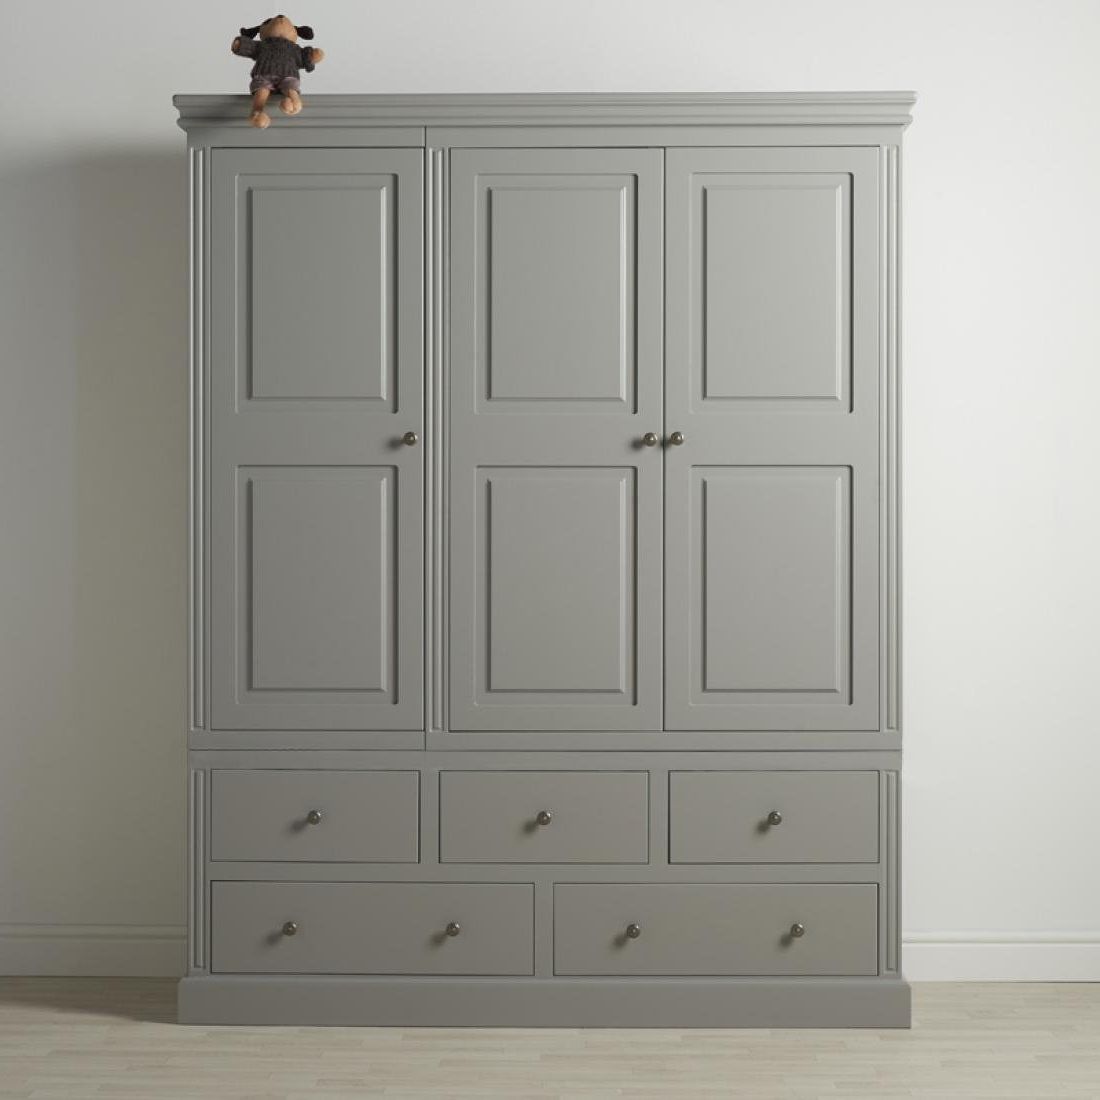 Archie 3 Door 5 Drawer Wardrobe | Boys Wardrobes | Kids Bedrooms |  Childrens Furniture Intended For Cheap Wardrobes With Drawers (View 8 of 20)